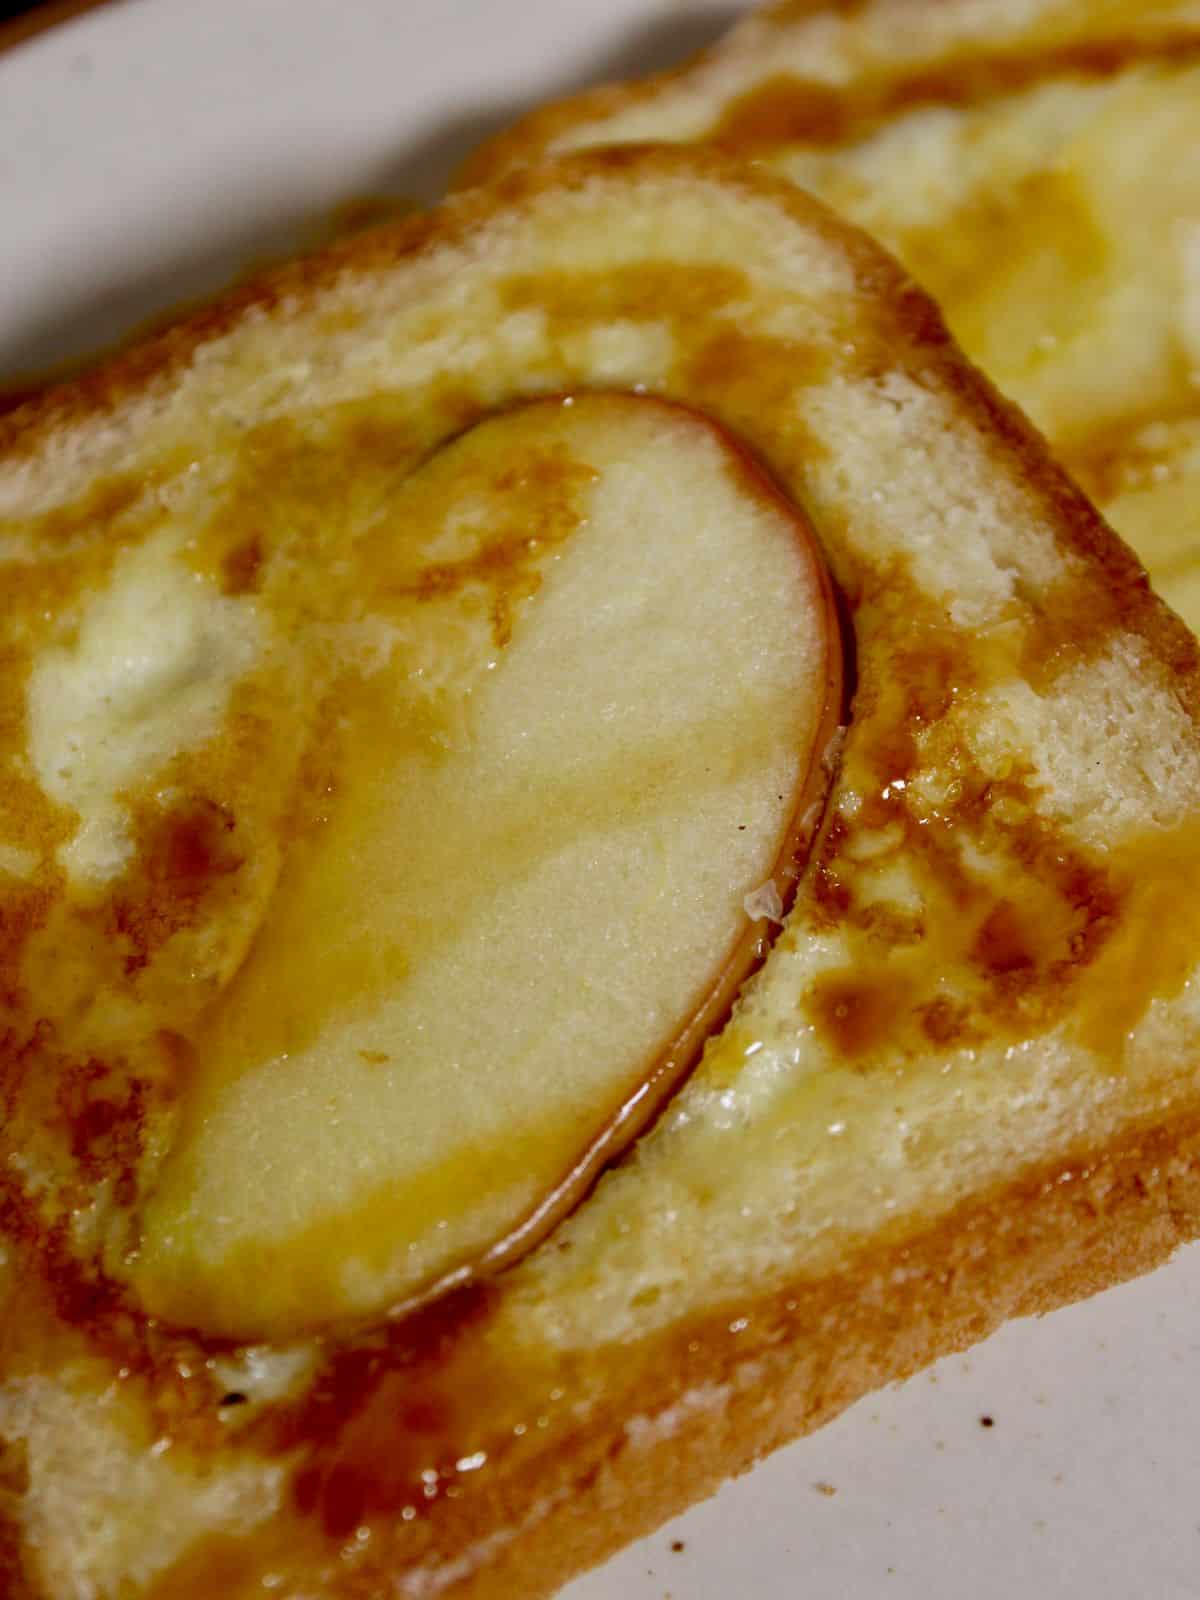 zoom in view of French toast with apple twist